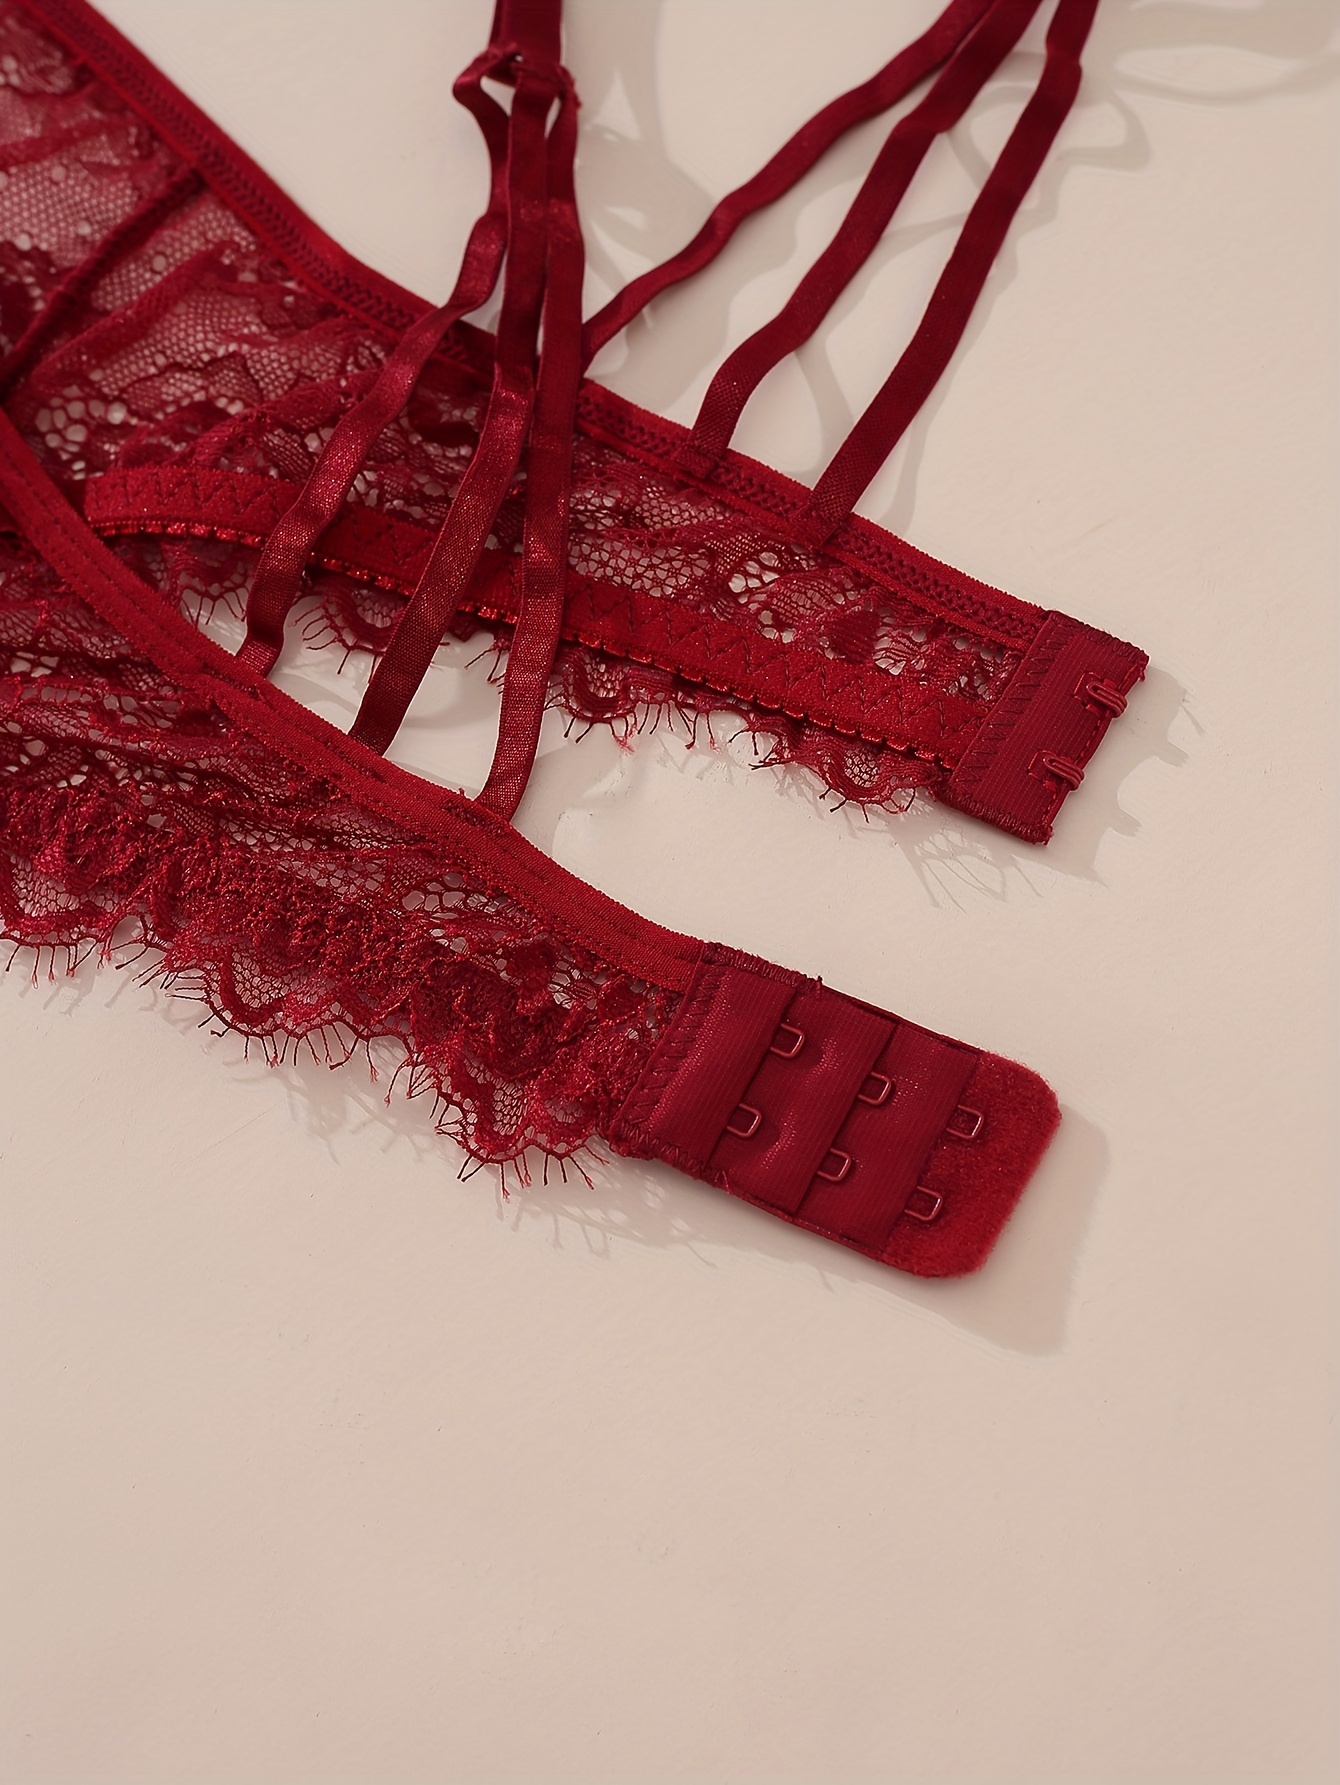 Red Eyelash Lace Strappy Thong, Lingerie